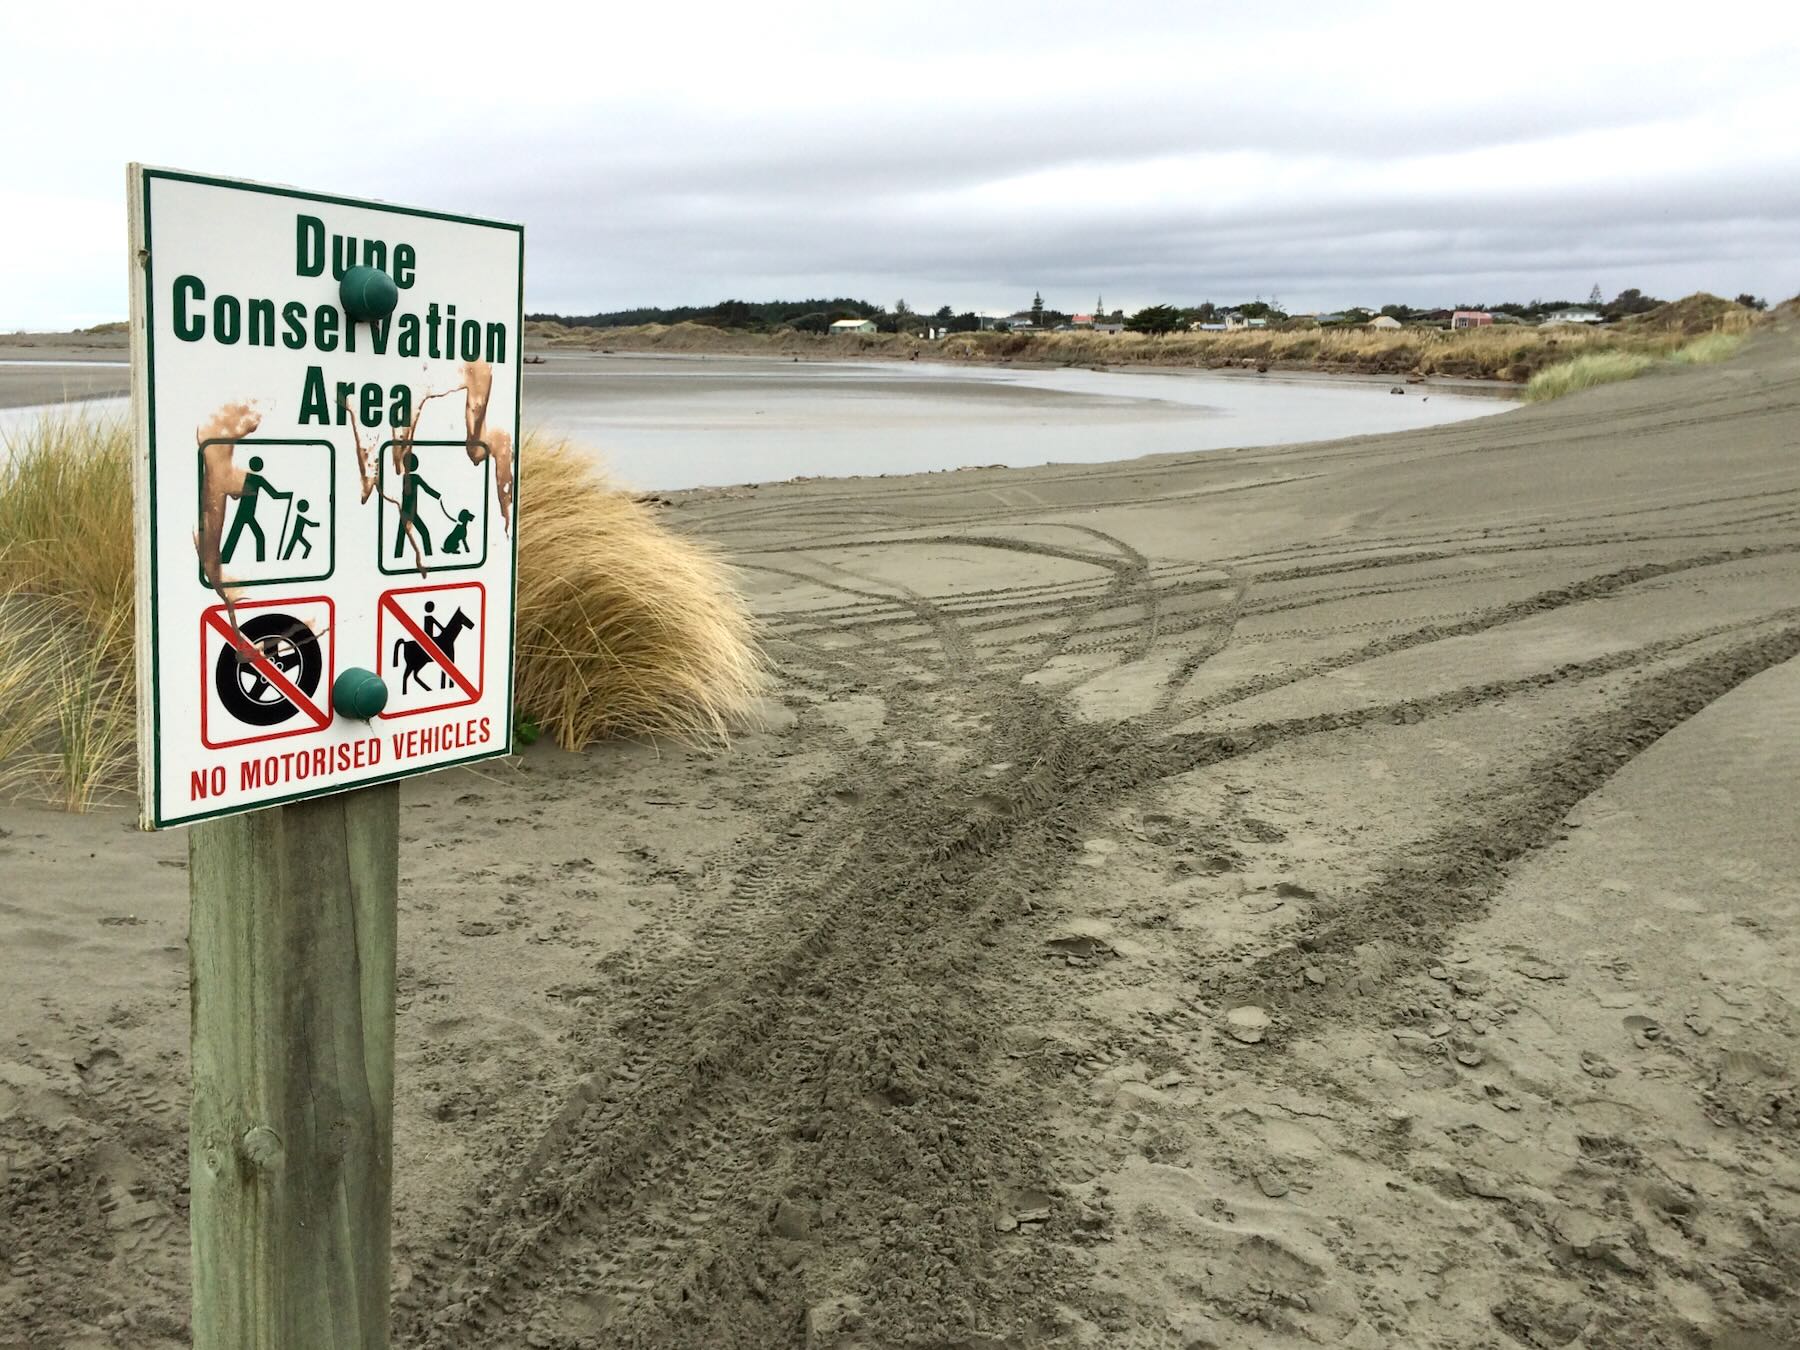 Dune Conservation area sign by north track off Reay Mackay Grove, August 2015. 